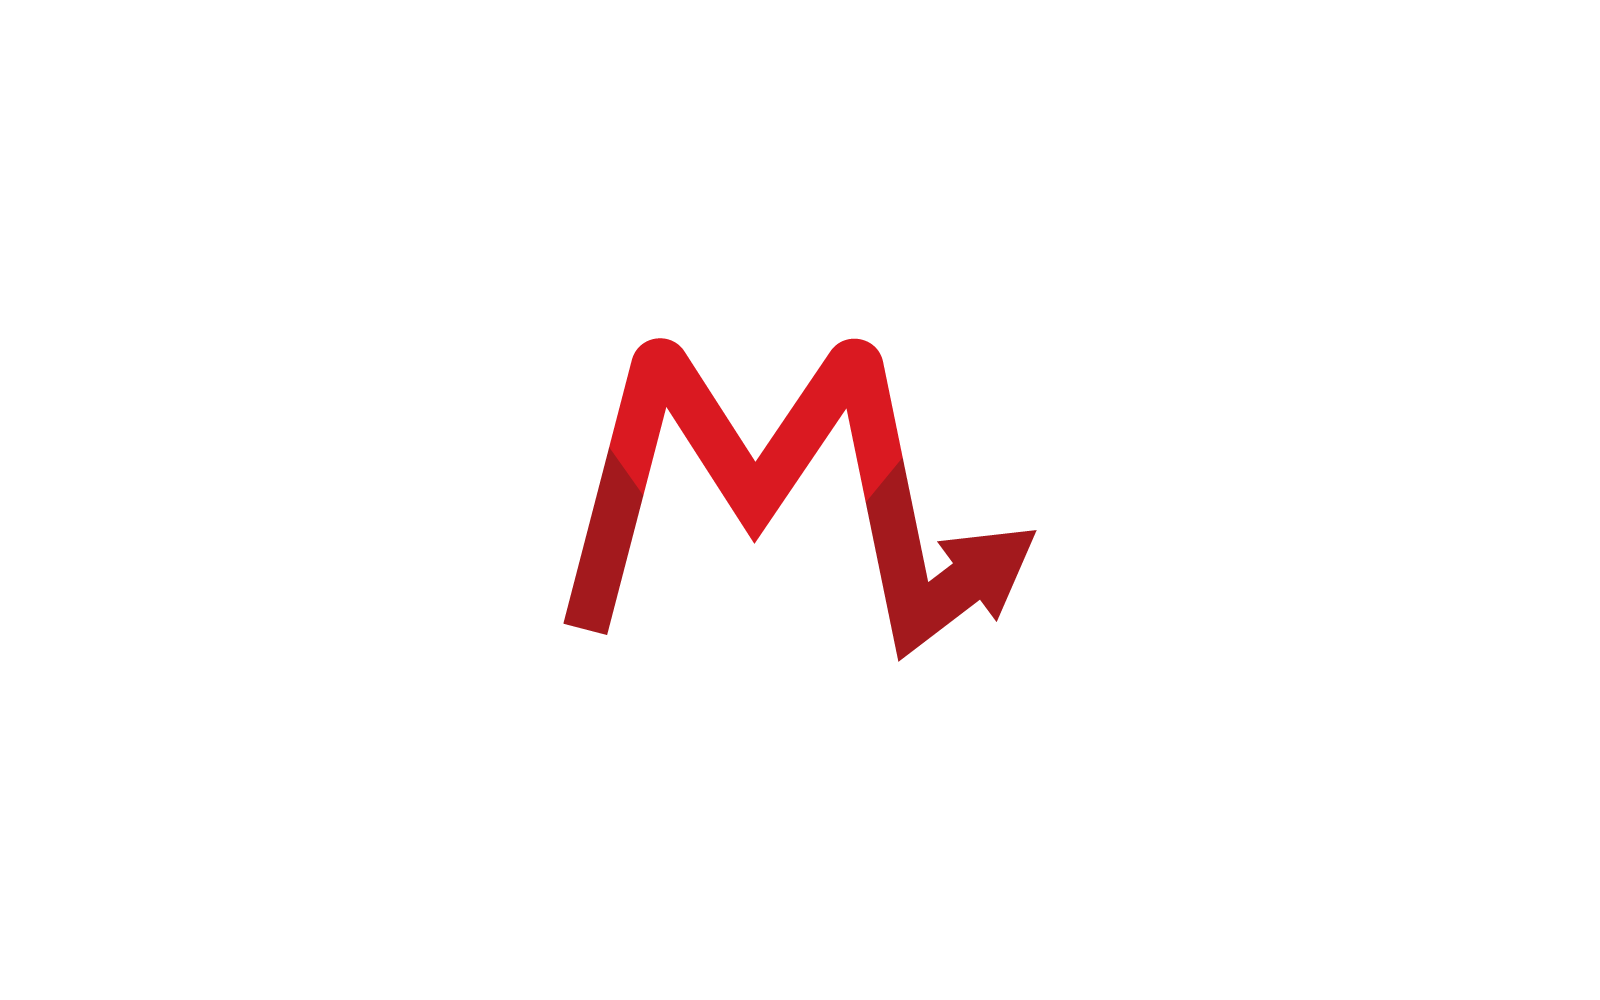 M Initial letter with arrow design illustration